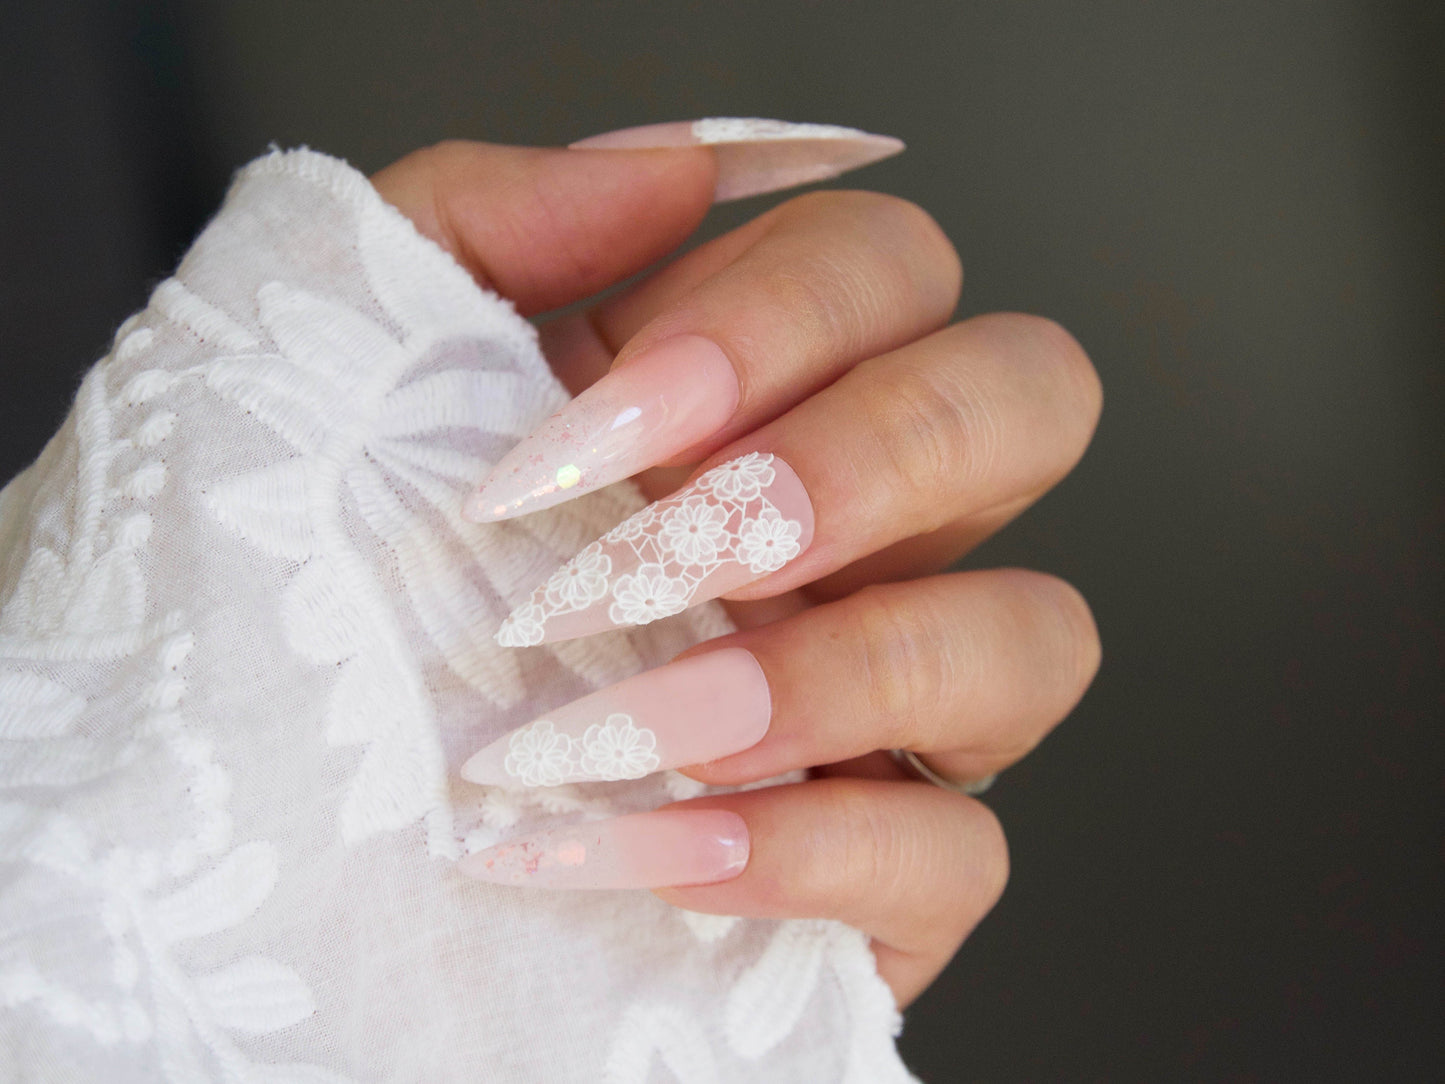 Bridal Wedding White Floral Lace 3D Embossed Nail Stickers/ Bridal Rose Laces Bow tie Peel off stencils/ Matte Finished Adhesive Sticker